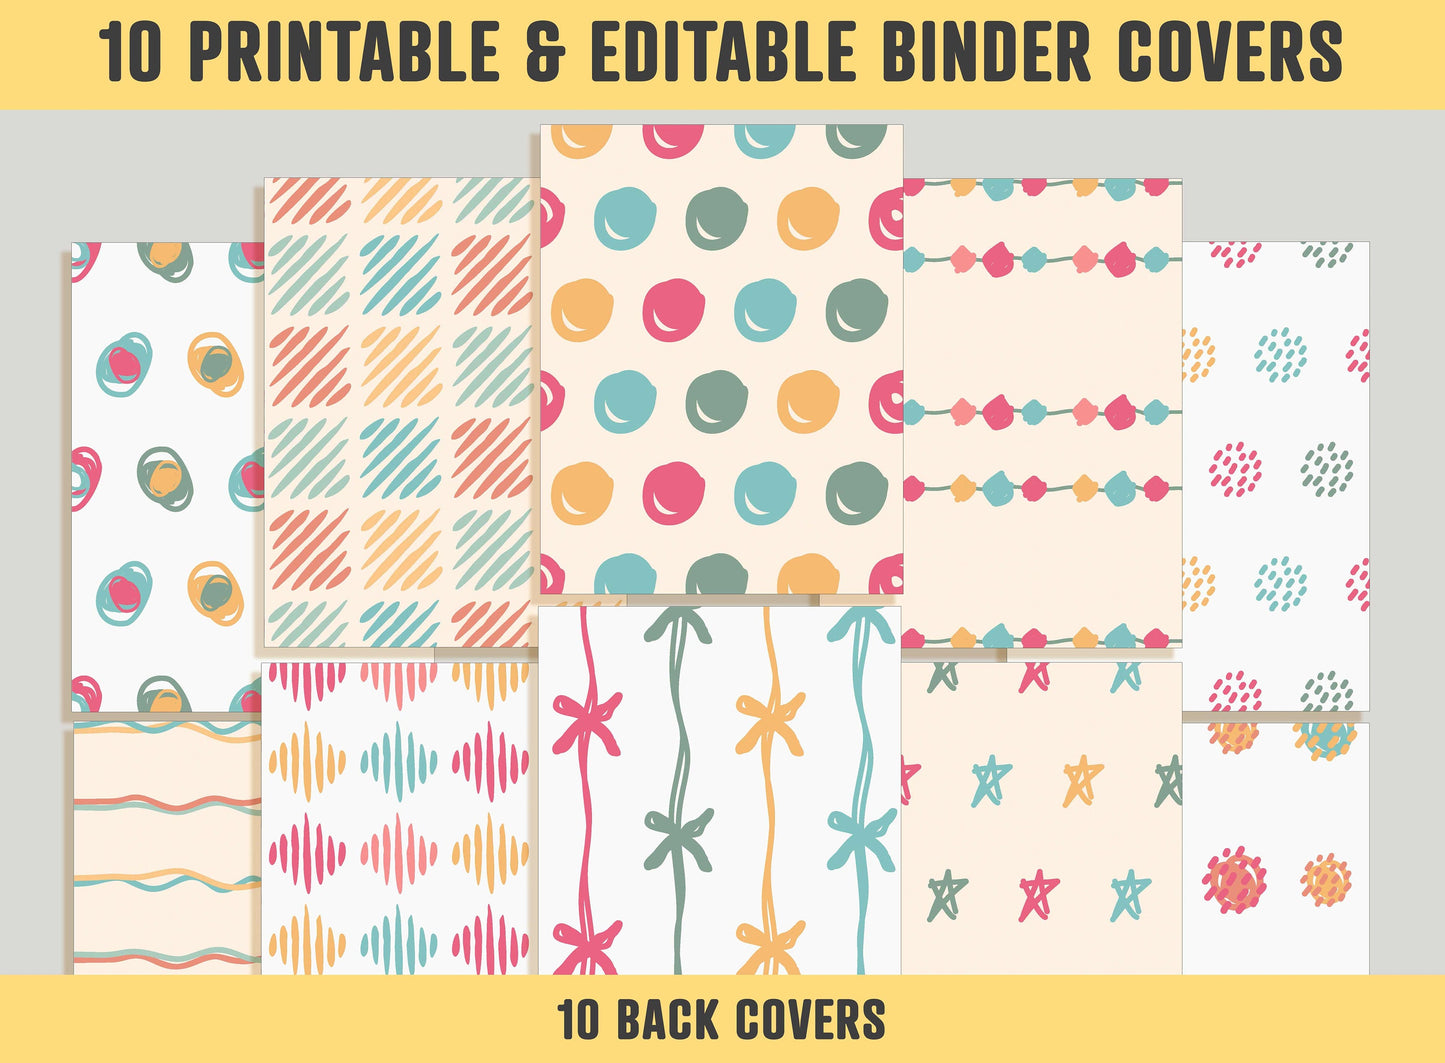 Binder Cover Printable Editable, 10 Covers+Spines, Binder Inserts, Planner Cover, Teacher and School Binder Cover, Binder Cover Template PDF